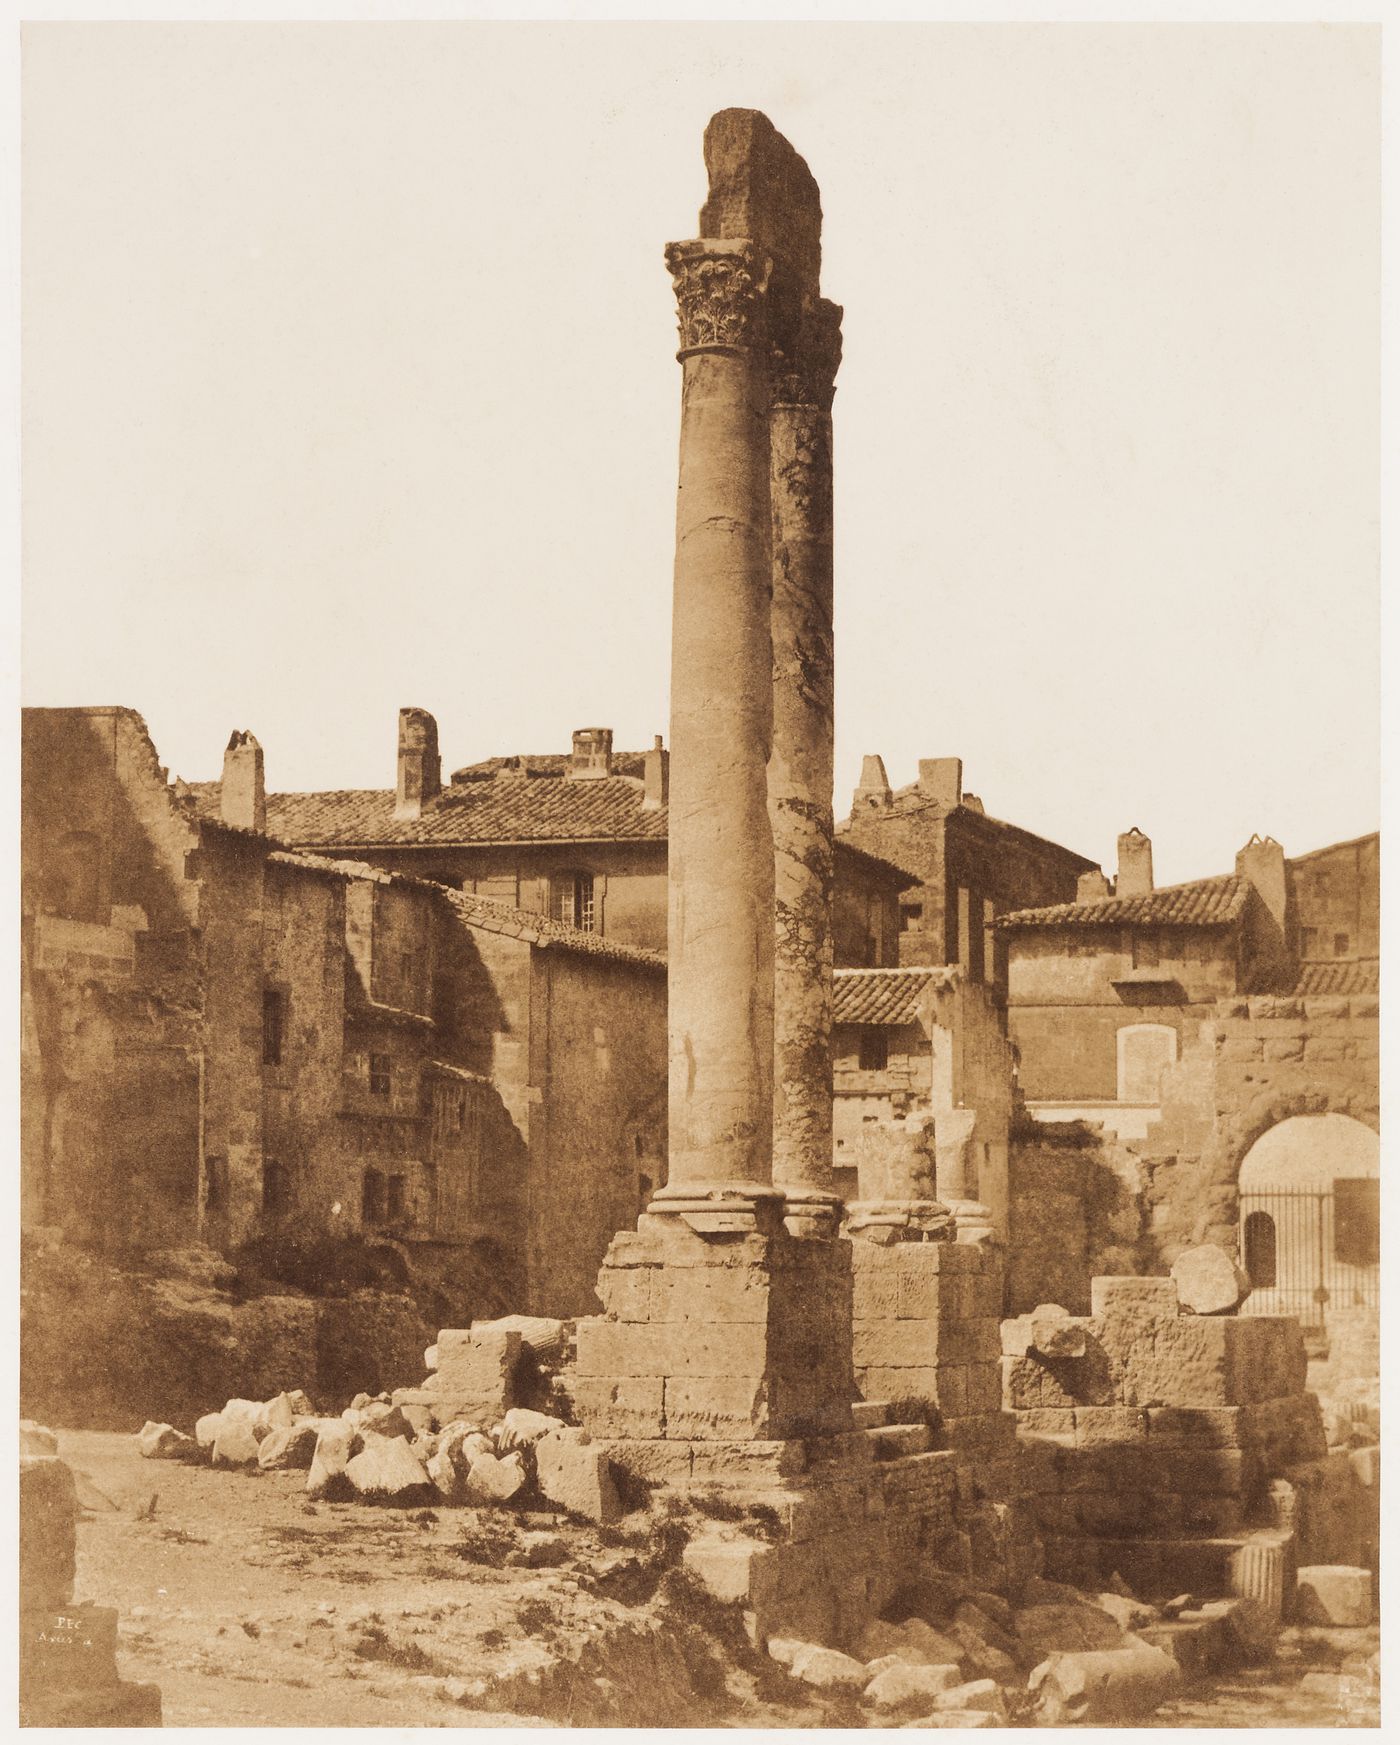 Two columns of a ruined Roman theater, Arles, France